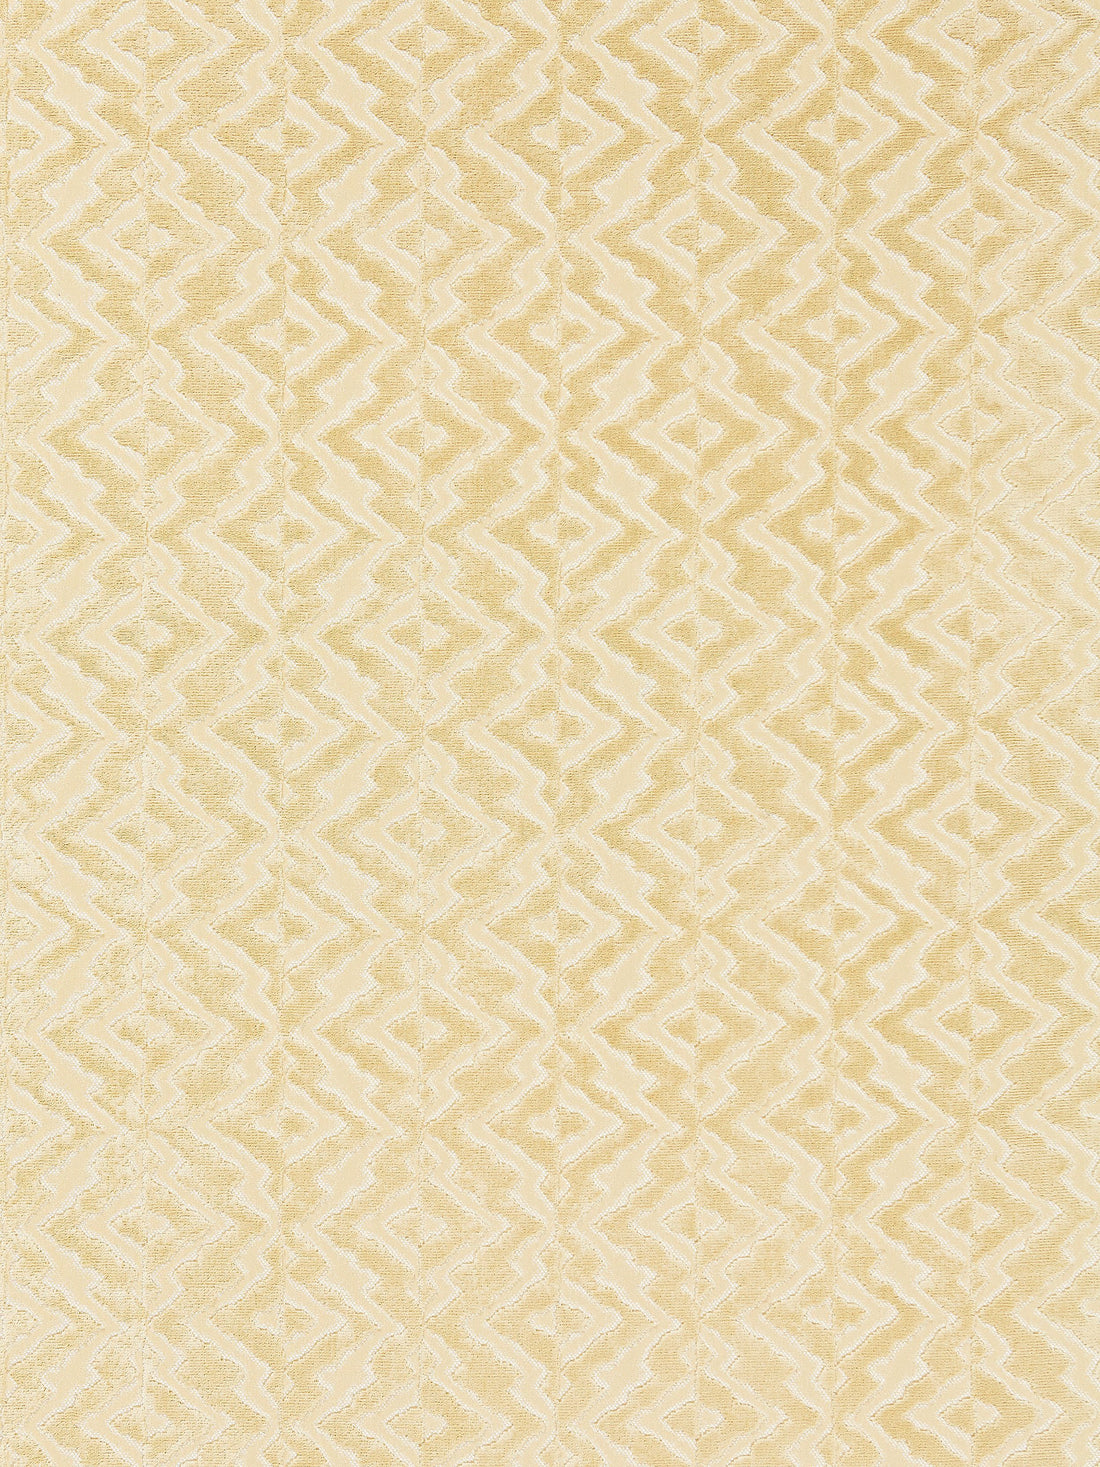 Echo Velvet fabric in chamois color - pattern number SC 000227085 - by Scalamandre in the Scalamandre Fabrics Book 1 collection